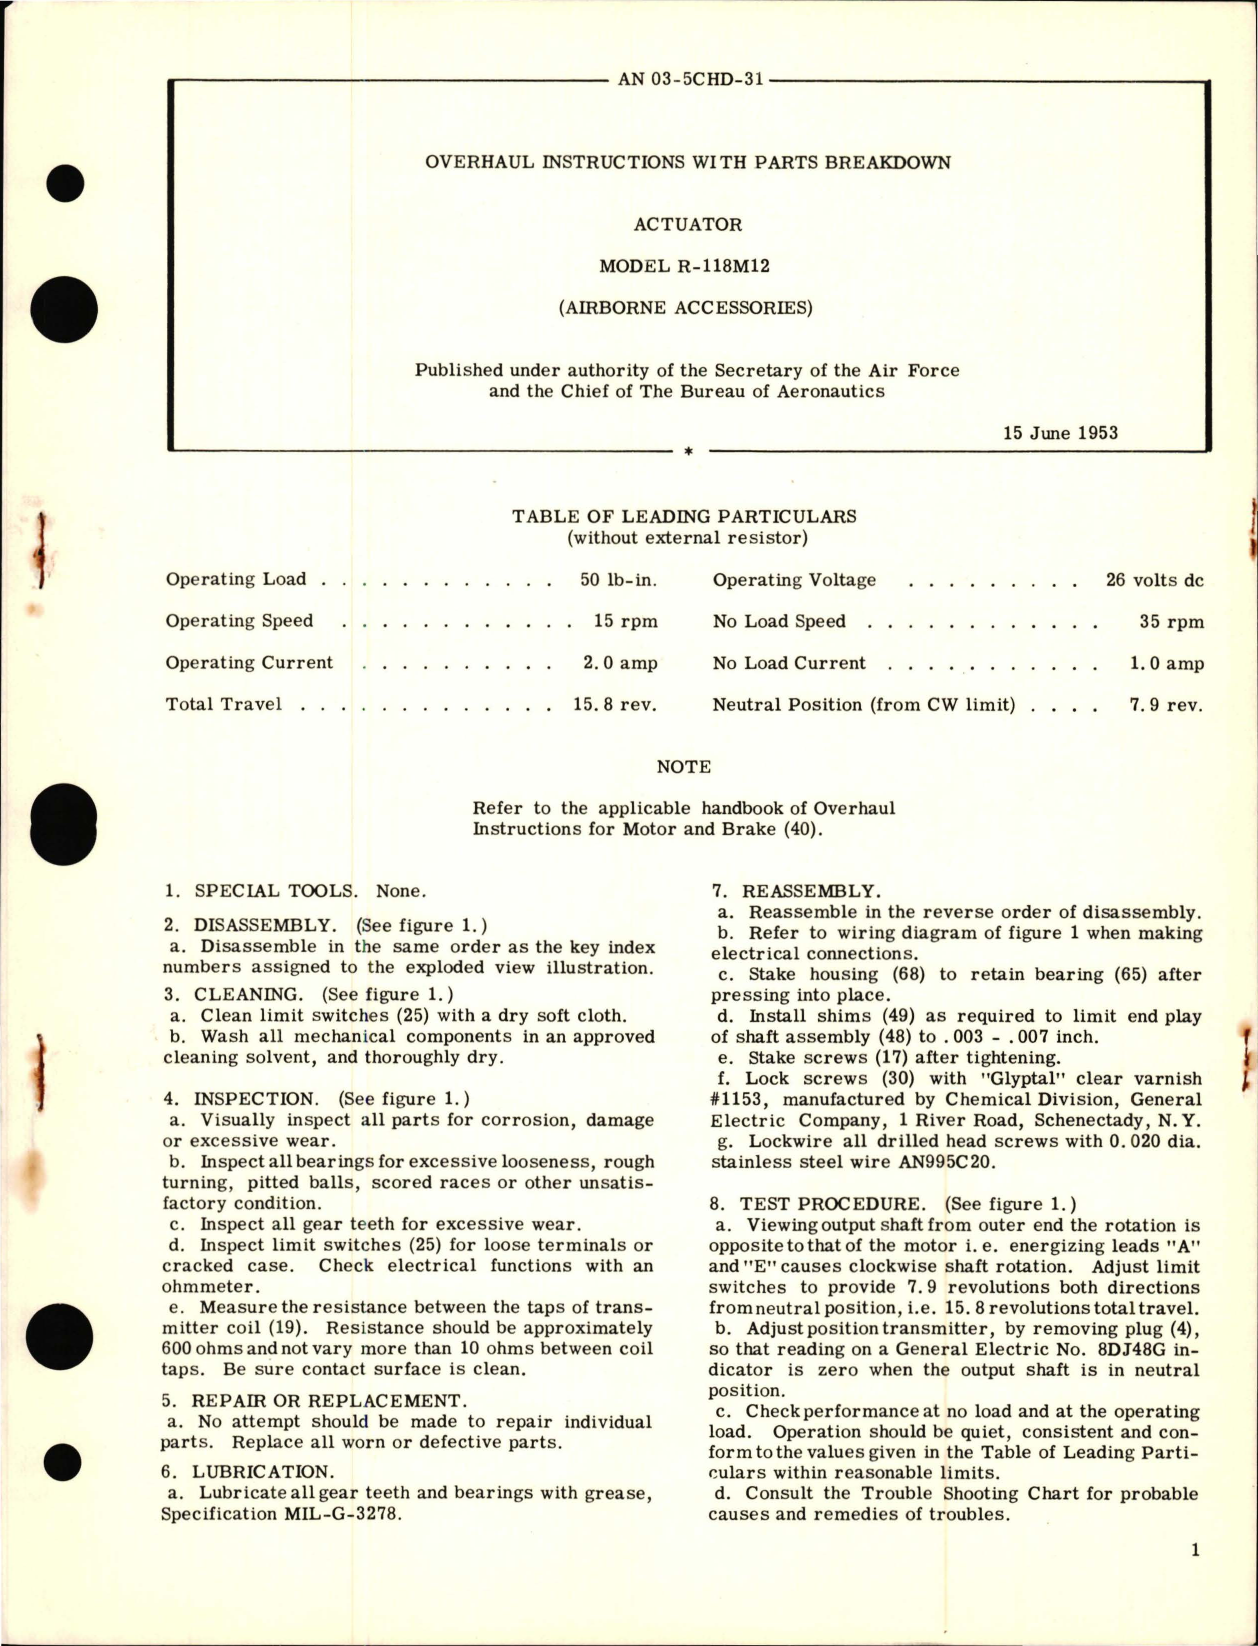 Sample page 1 from AirCorps Library document: Overhaul Instructions with Parts Breakdown for Actuator Model R-118M12